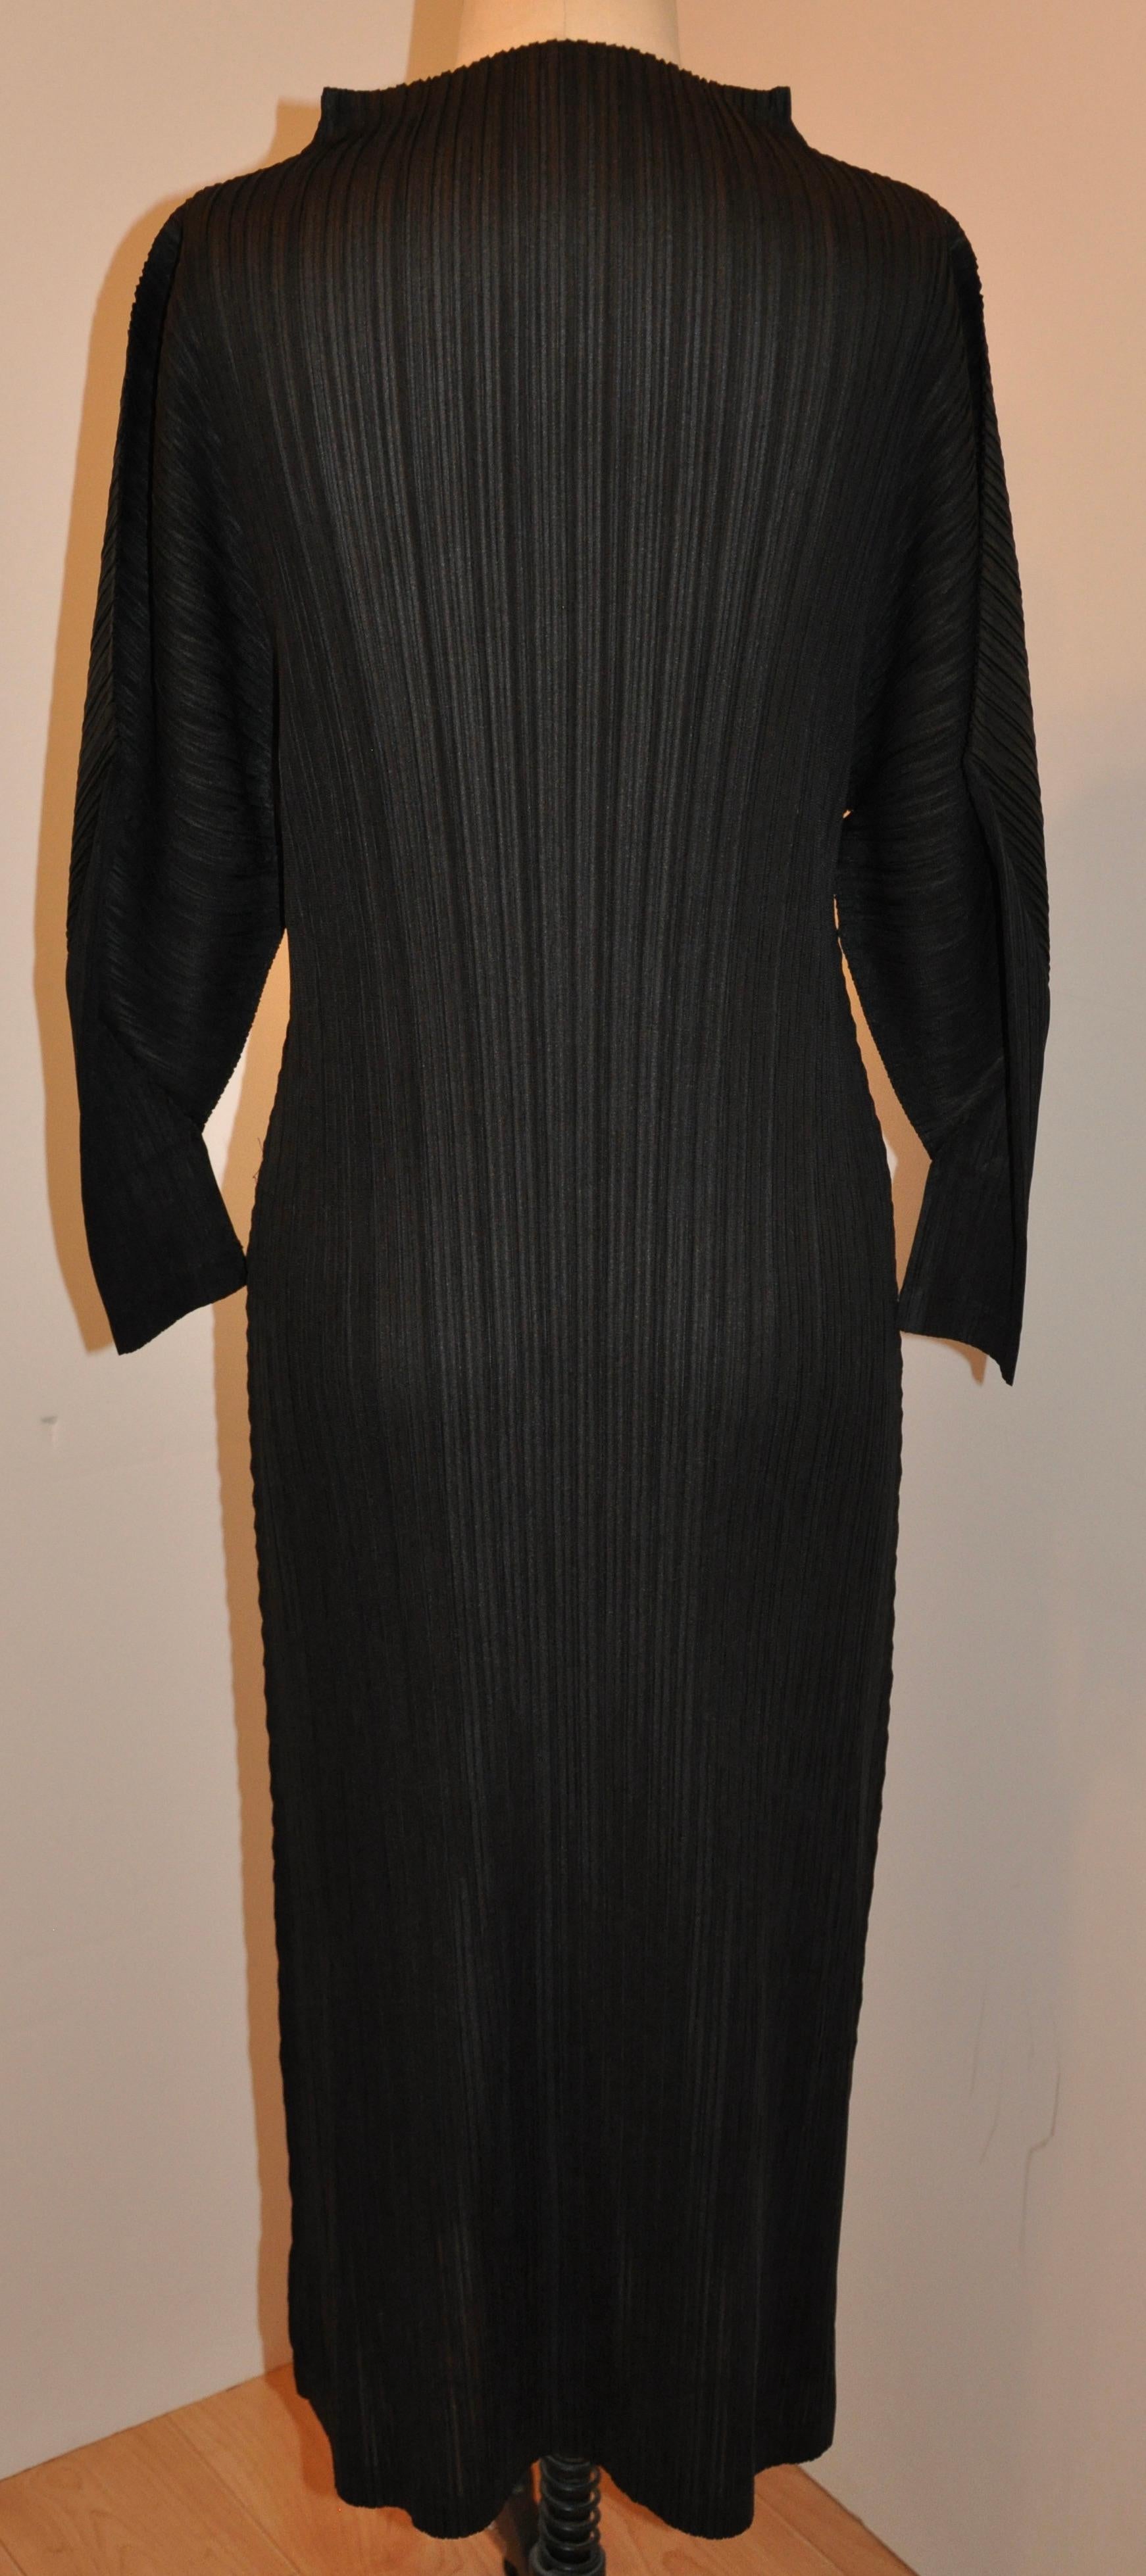 Issey Miyake Iconic Signature Jet-Black High-Neck Pullover Dress For Sale 3